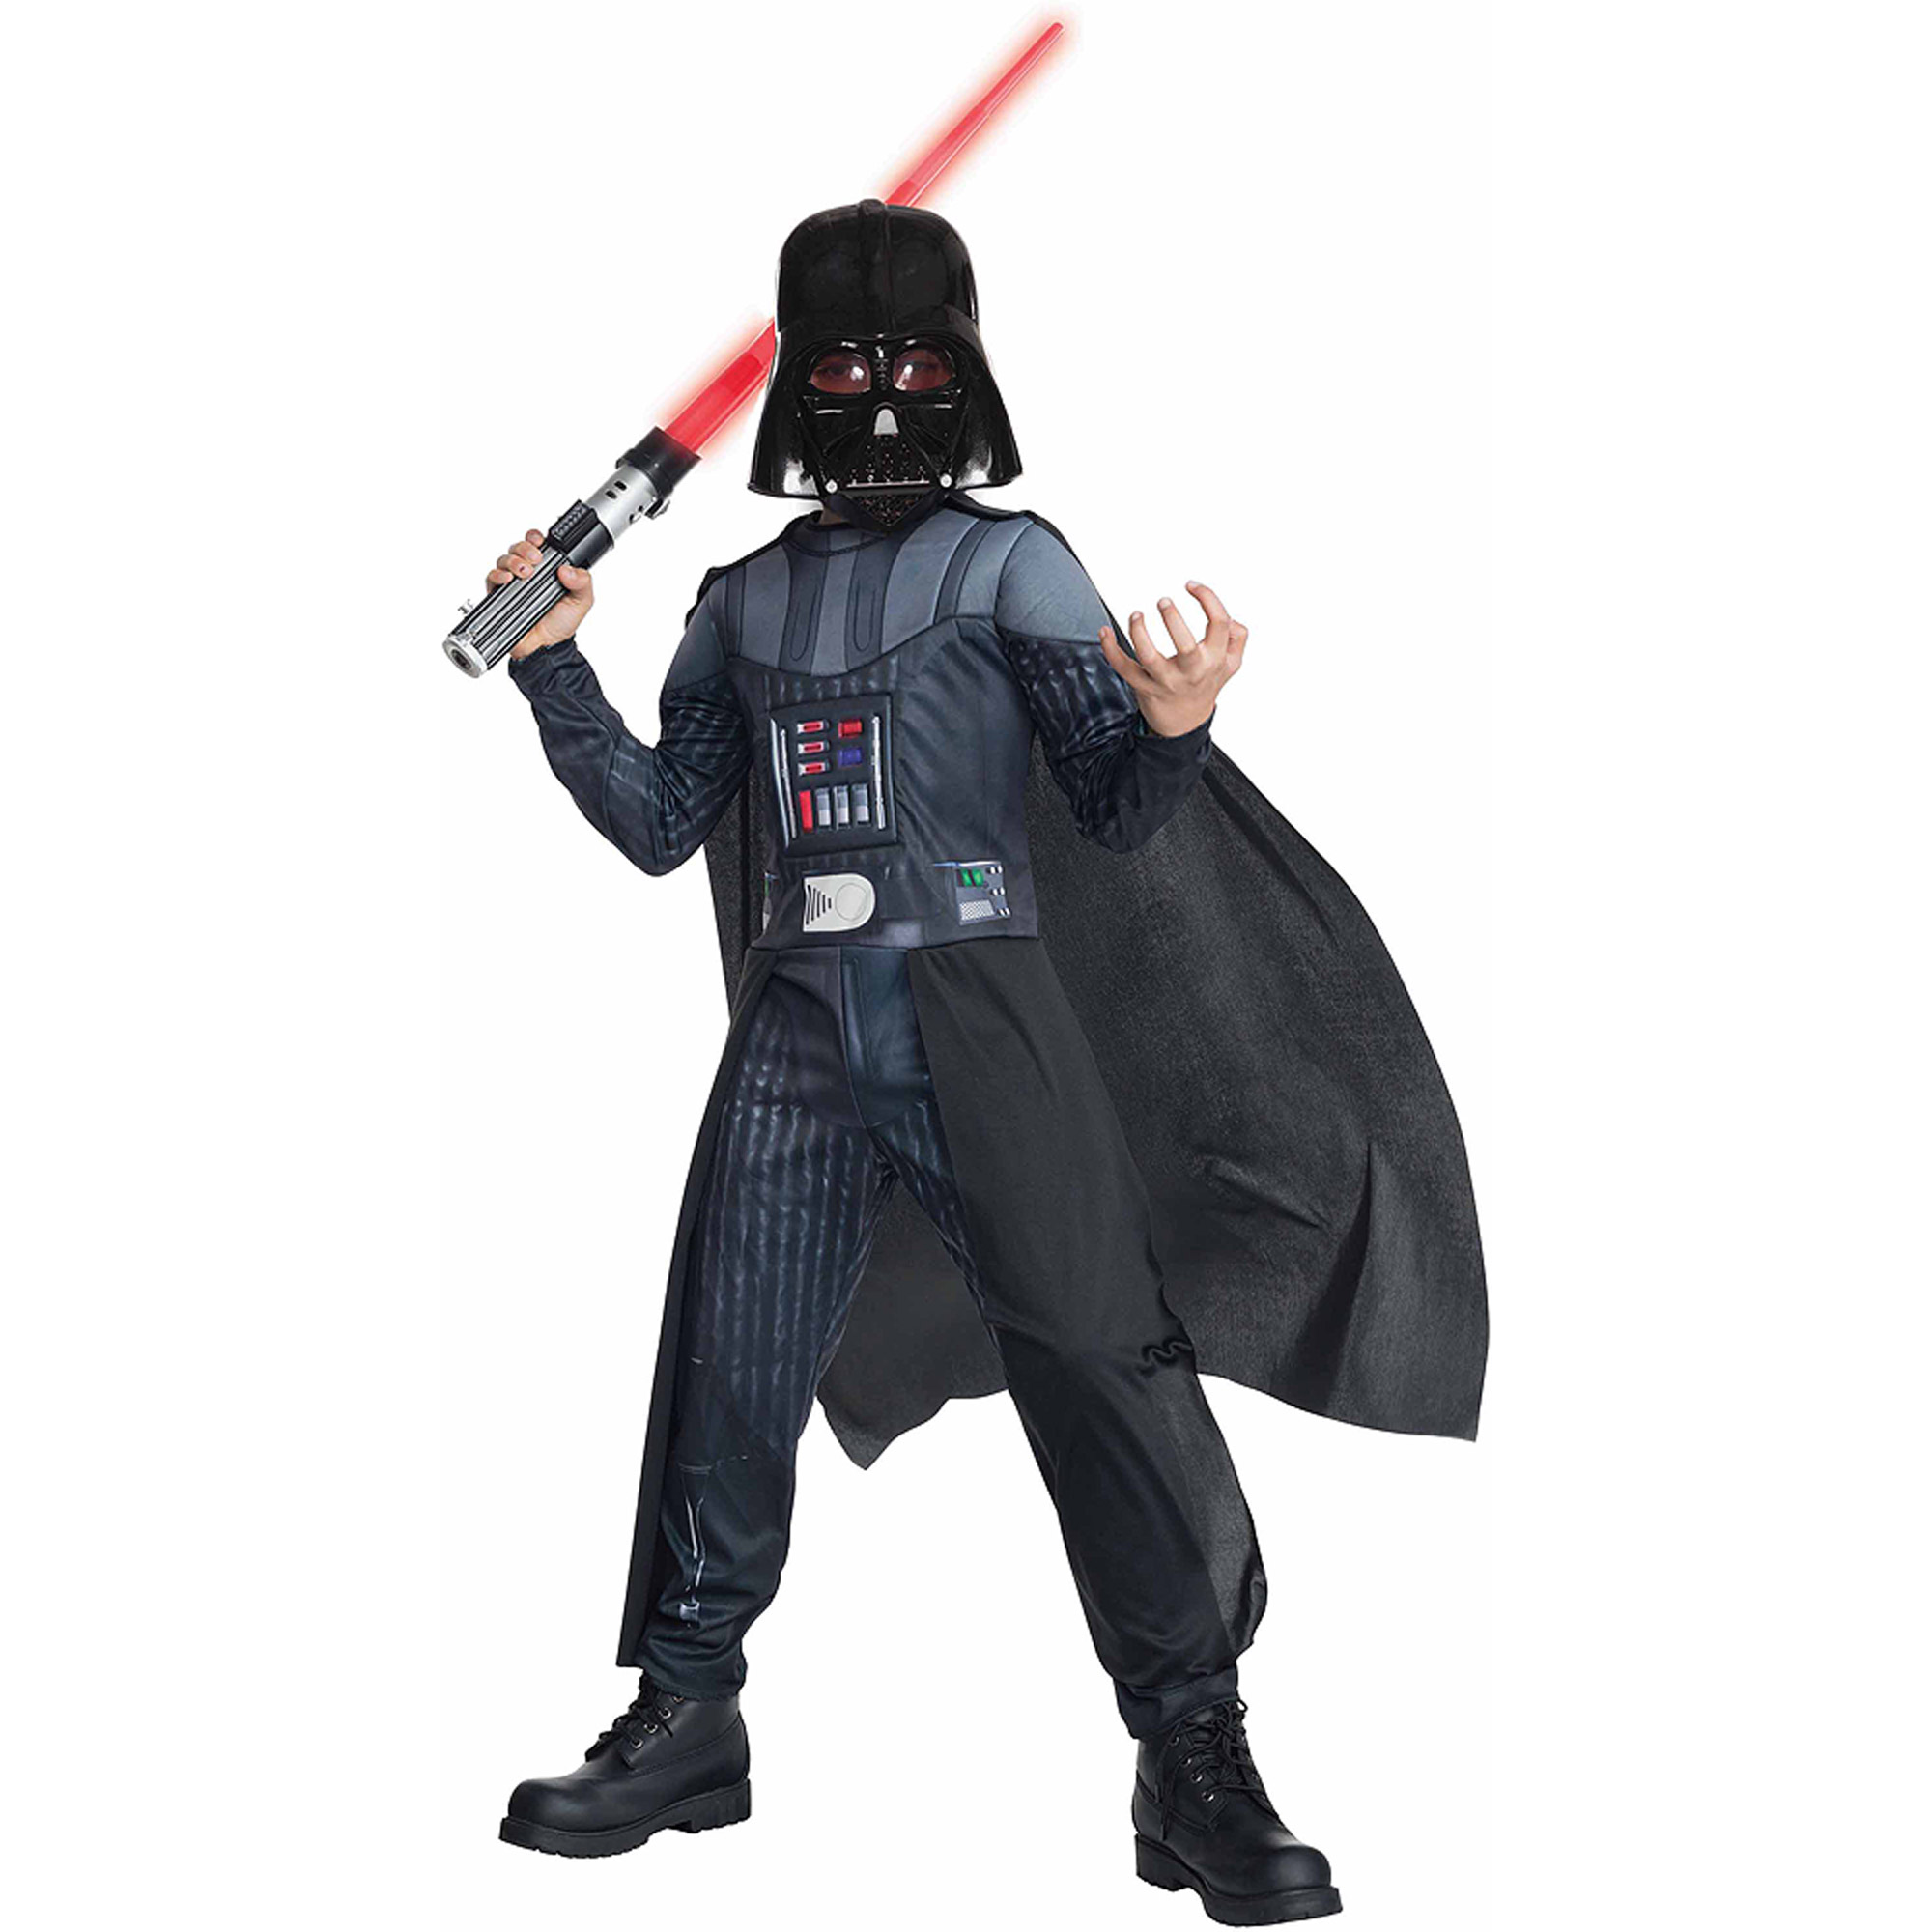 Star Wars Darth Vader Child Dress Up / Role Play Costume - image 1 of 1